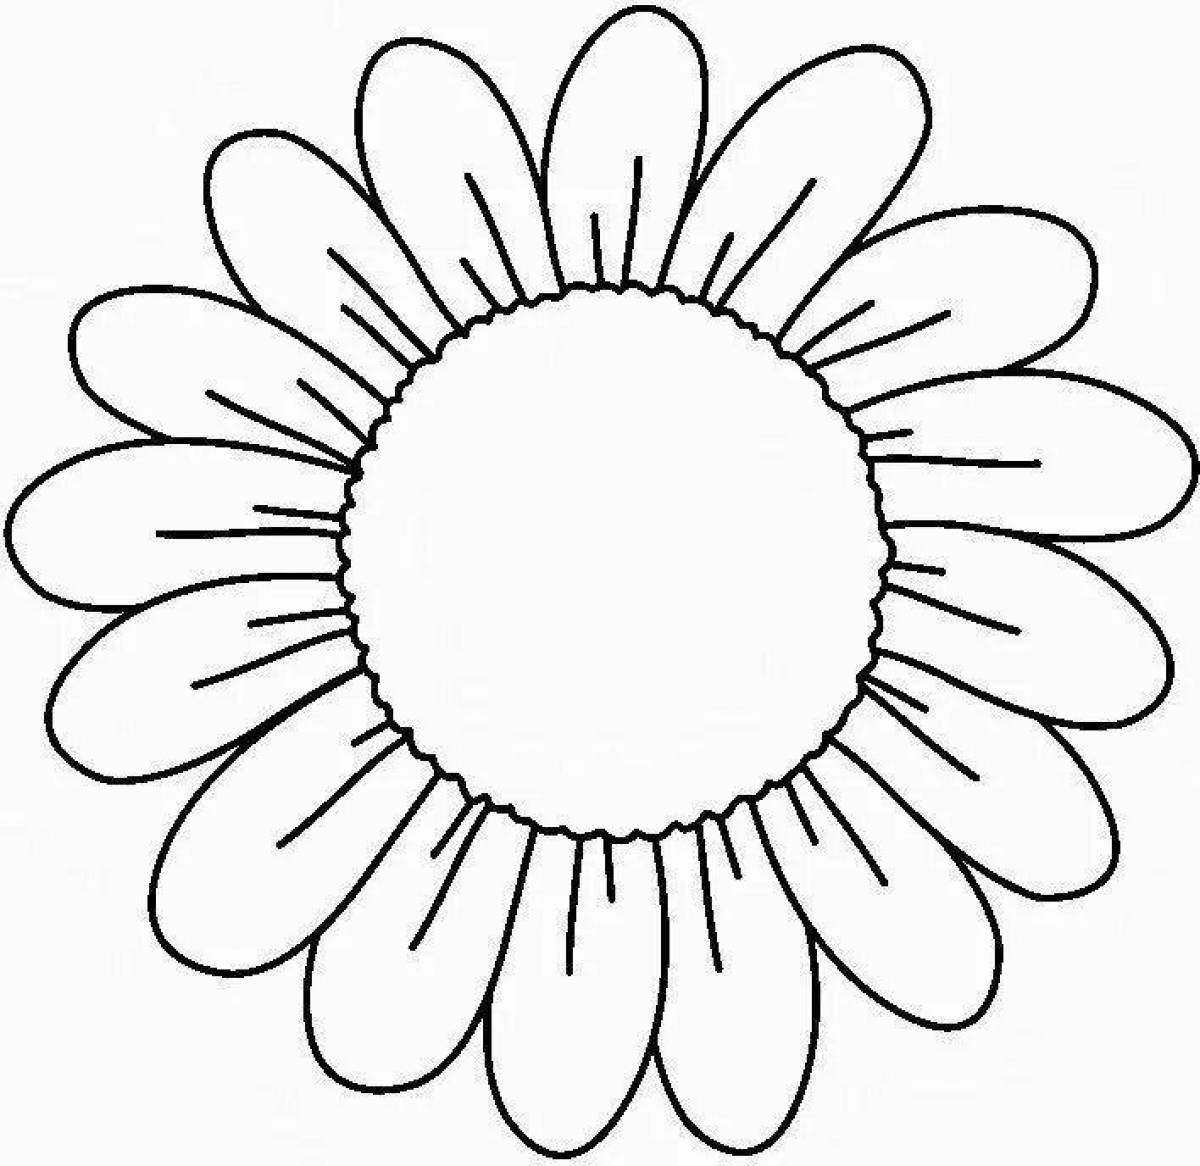 Coloring book shining chamomile flowers